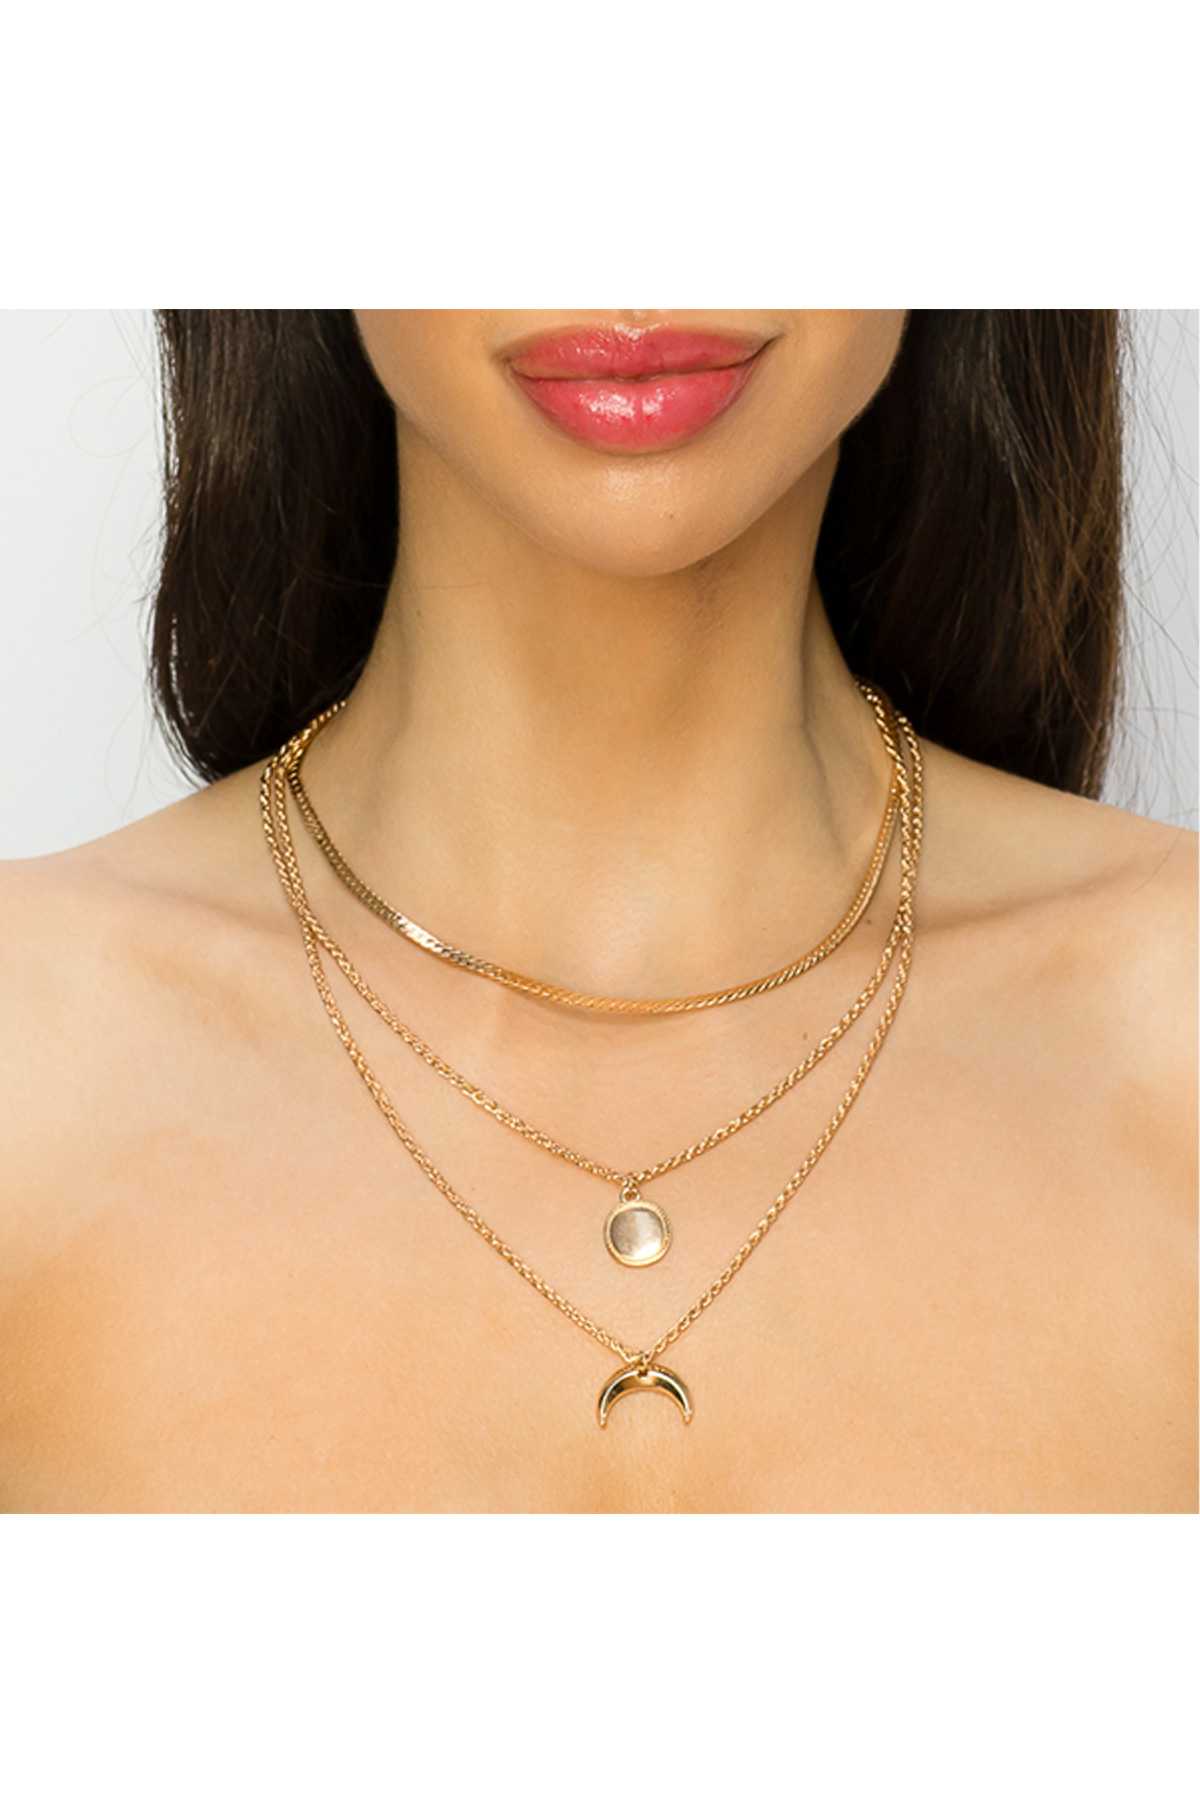 Metal Half Moon and Layered Chain Necklace